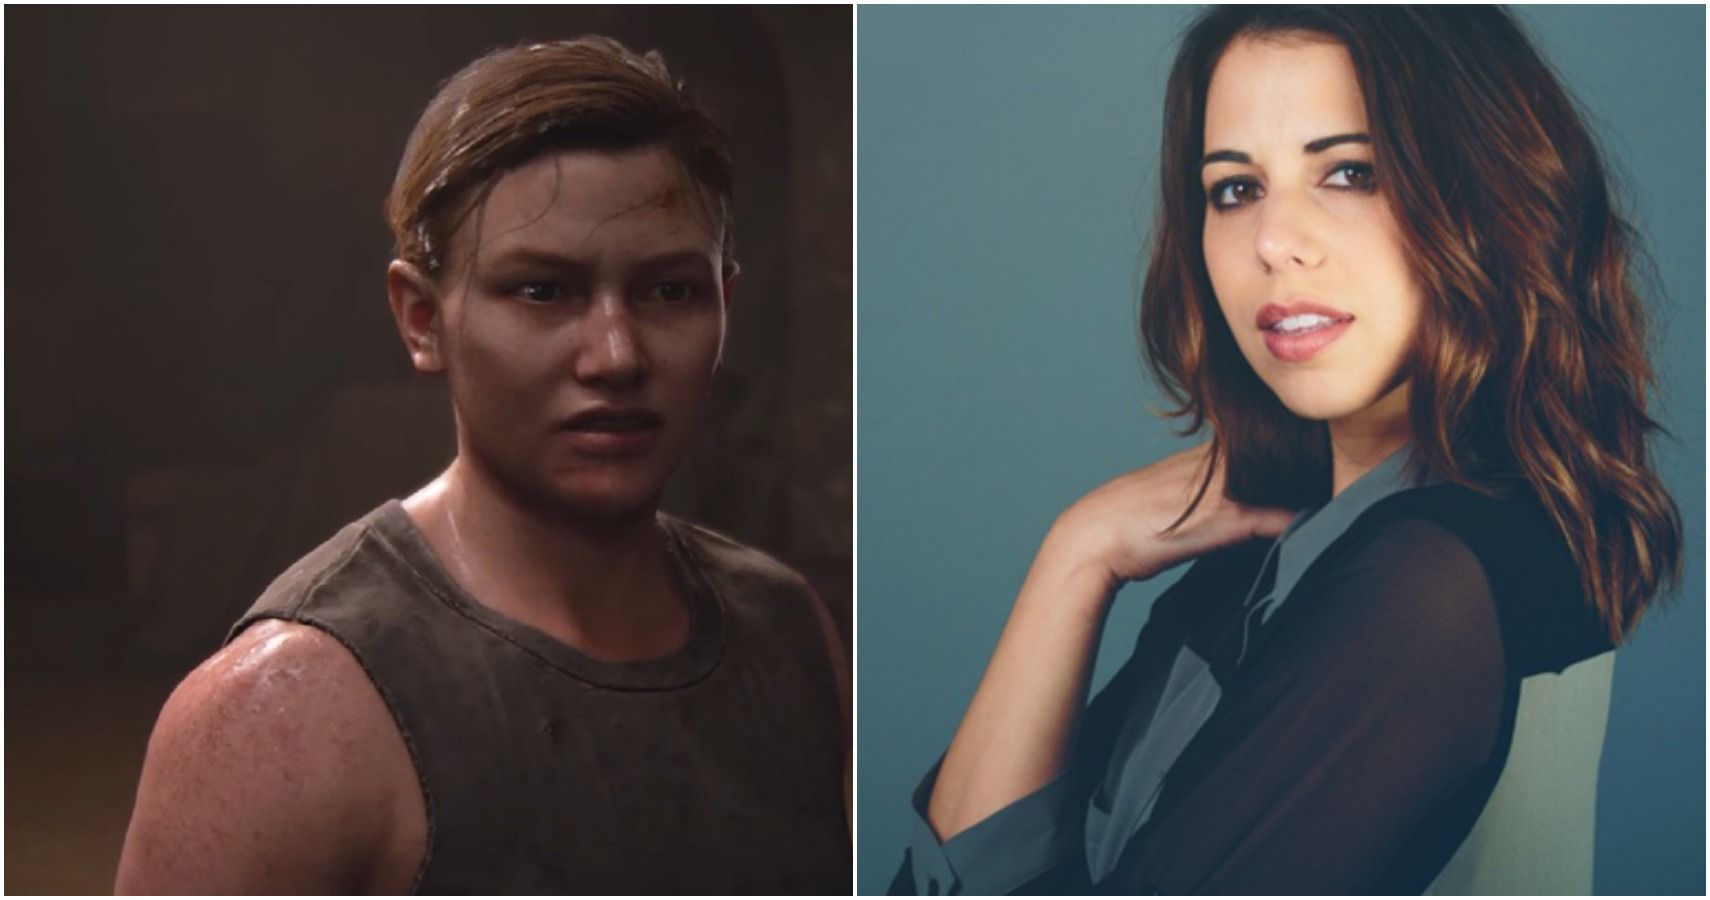 Laura Bailey: The Last of Us 2 Actor Reveals Death Threats